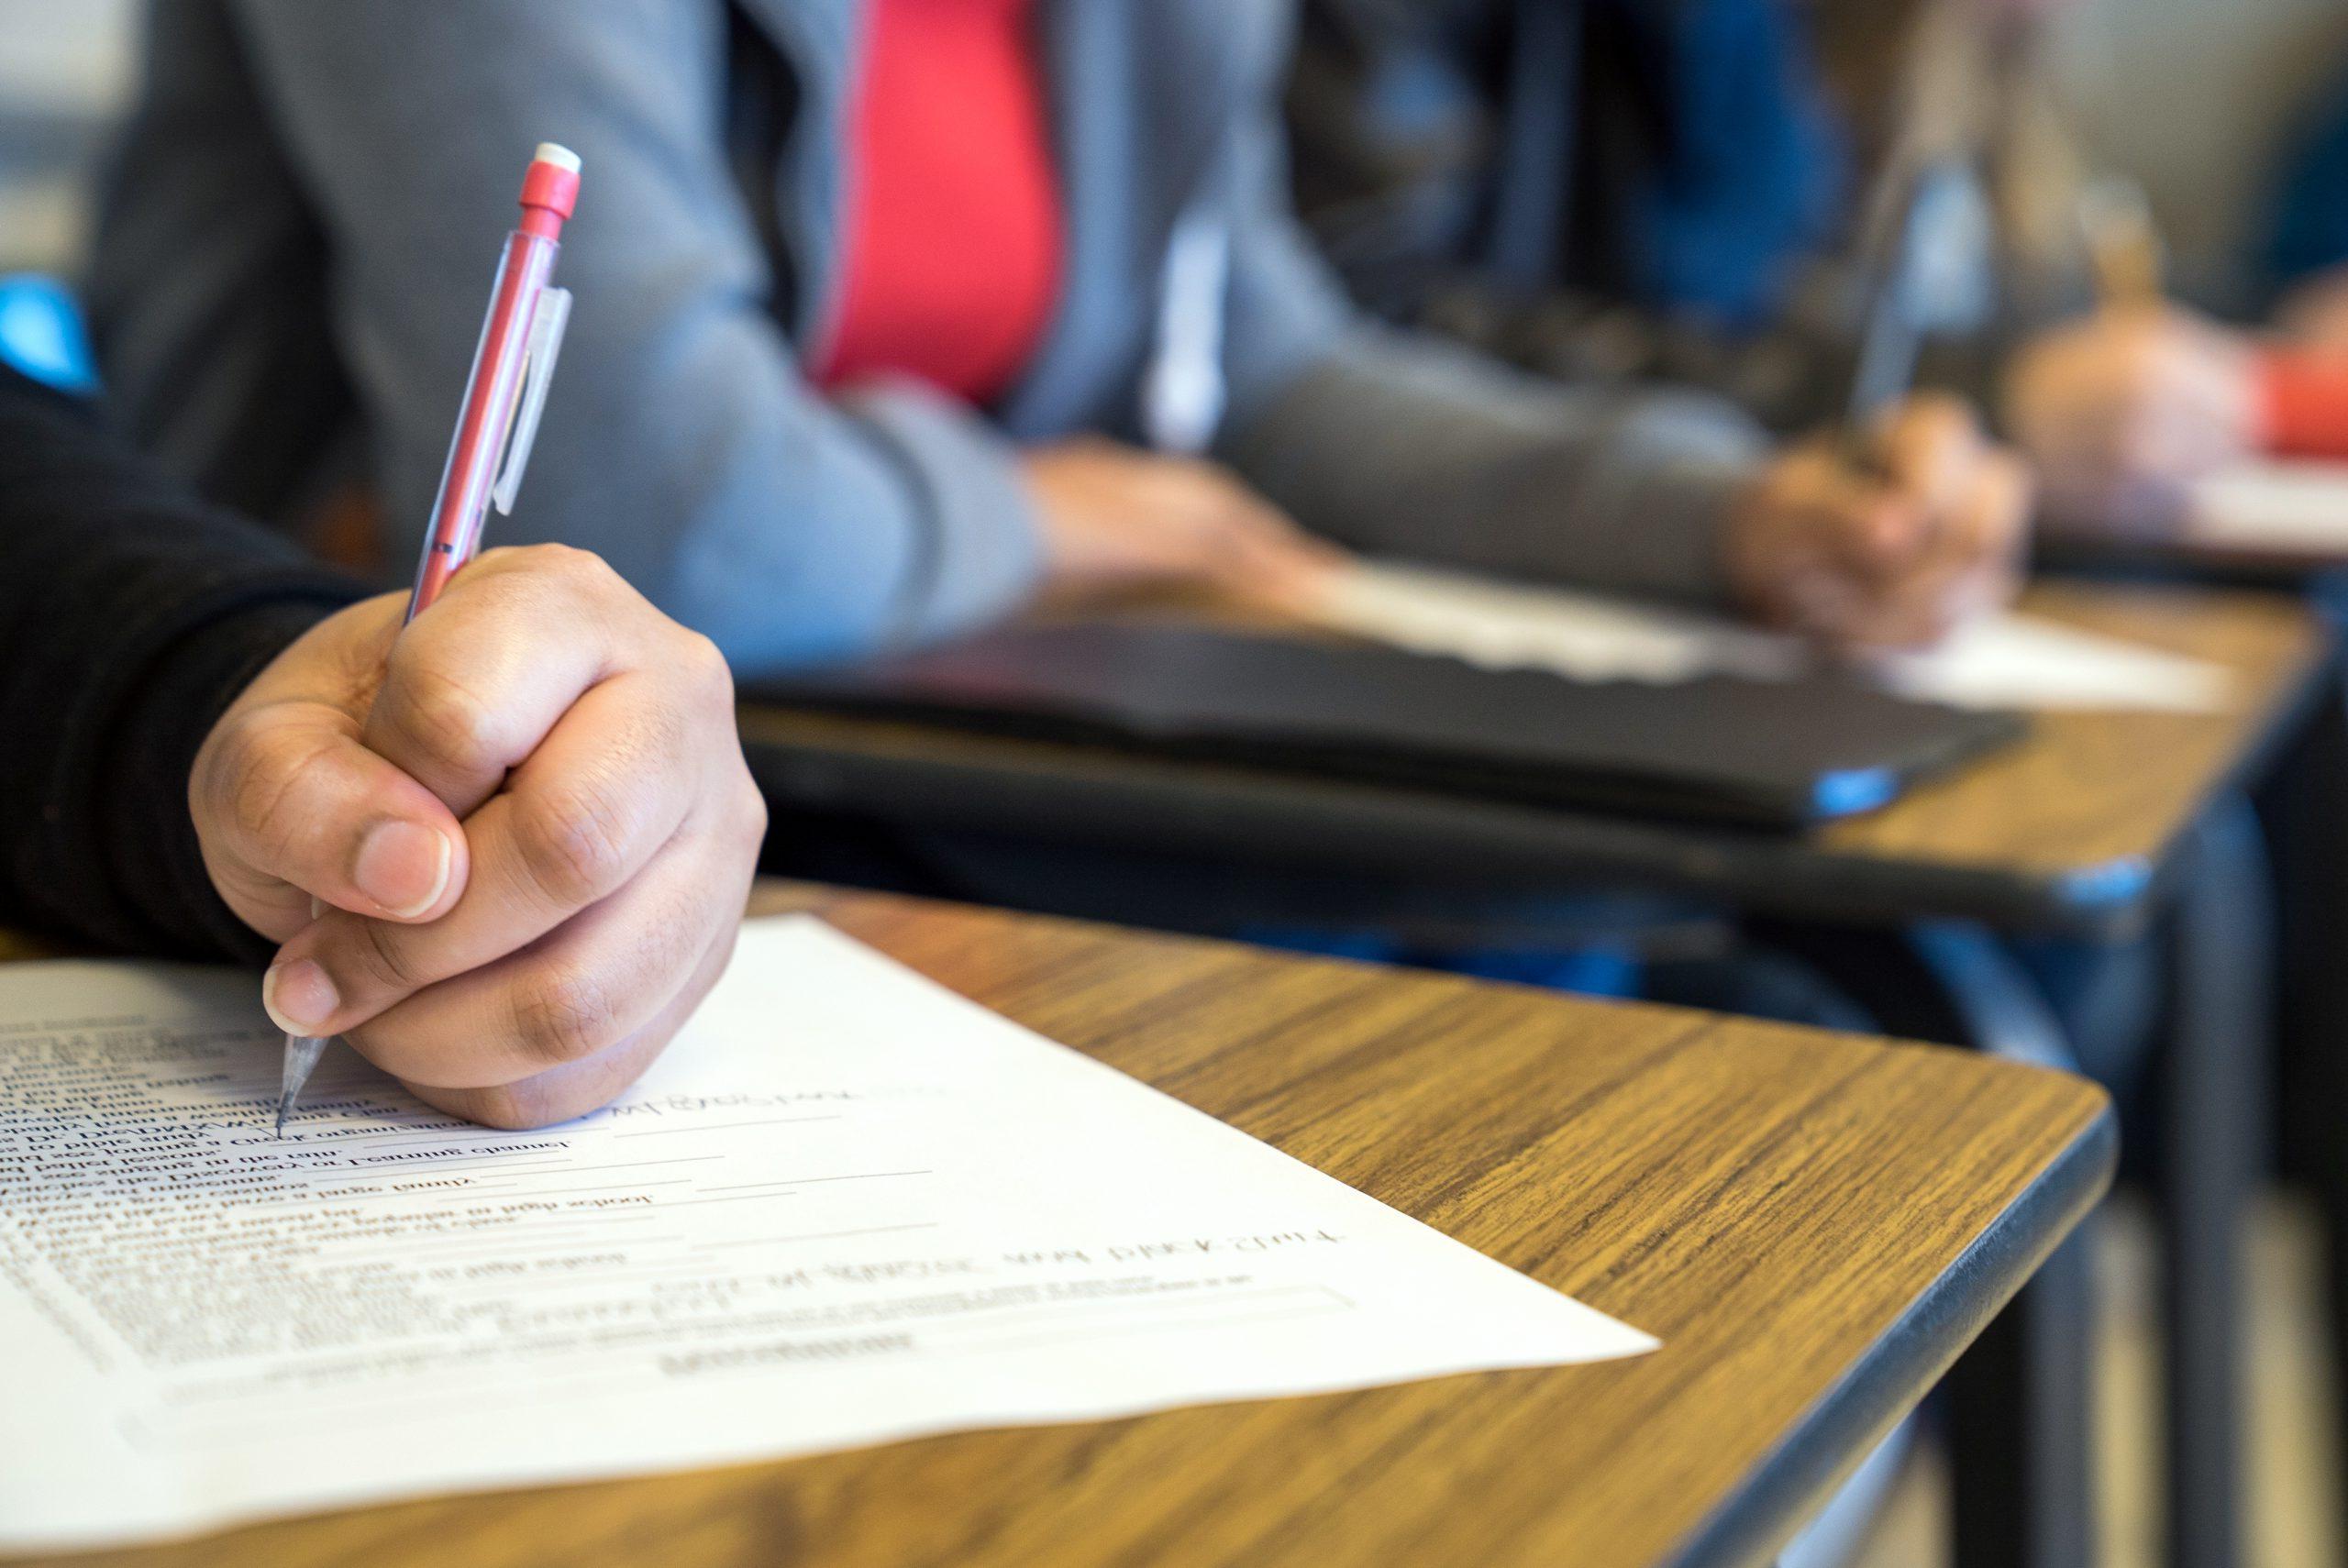 A students hand writing with a mechanical pencil on a handout given out during class.